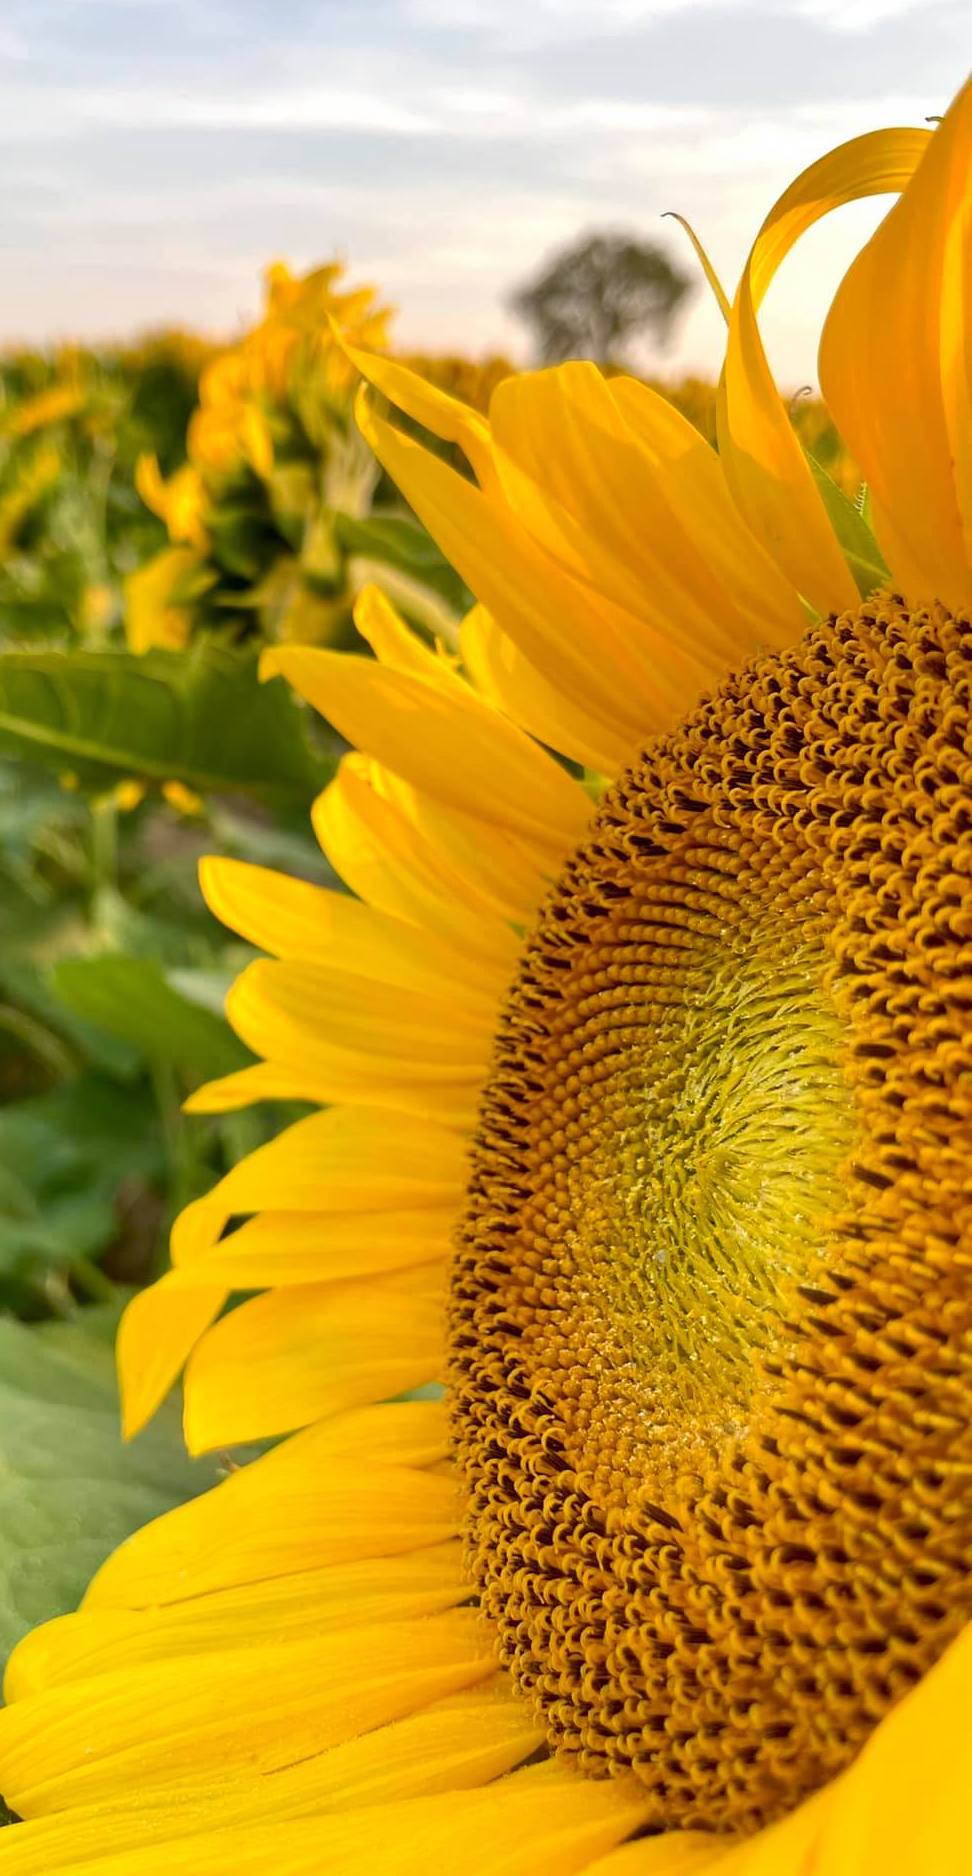 The sunflower head comprises many small, tuberous flowers. The head contains as many as 2,000 oil-rich seeds. Photo courtesy of Amberlyn Brown.